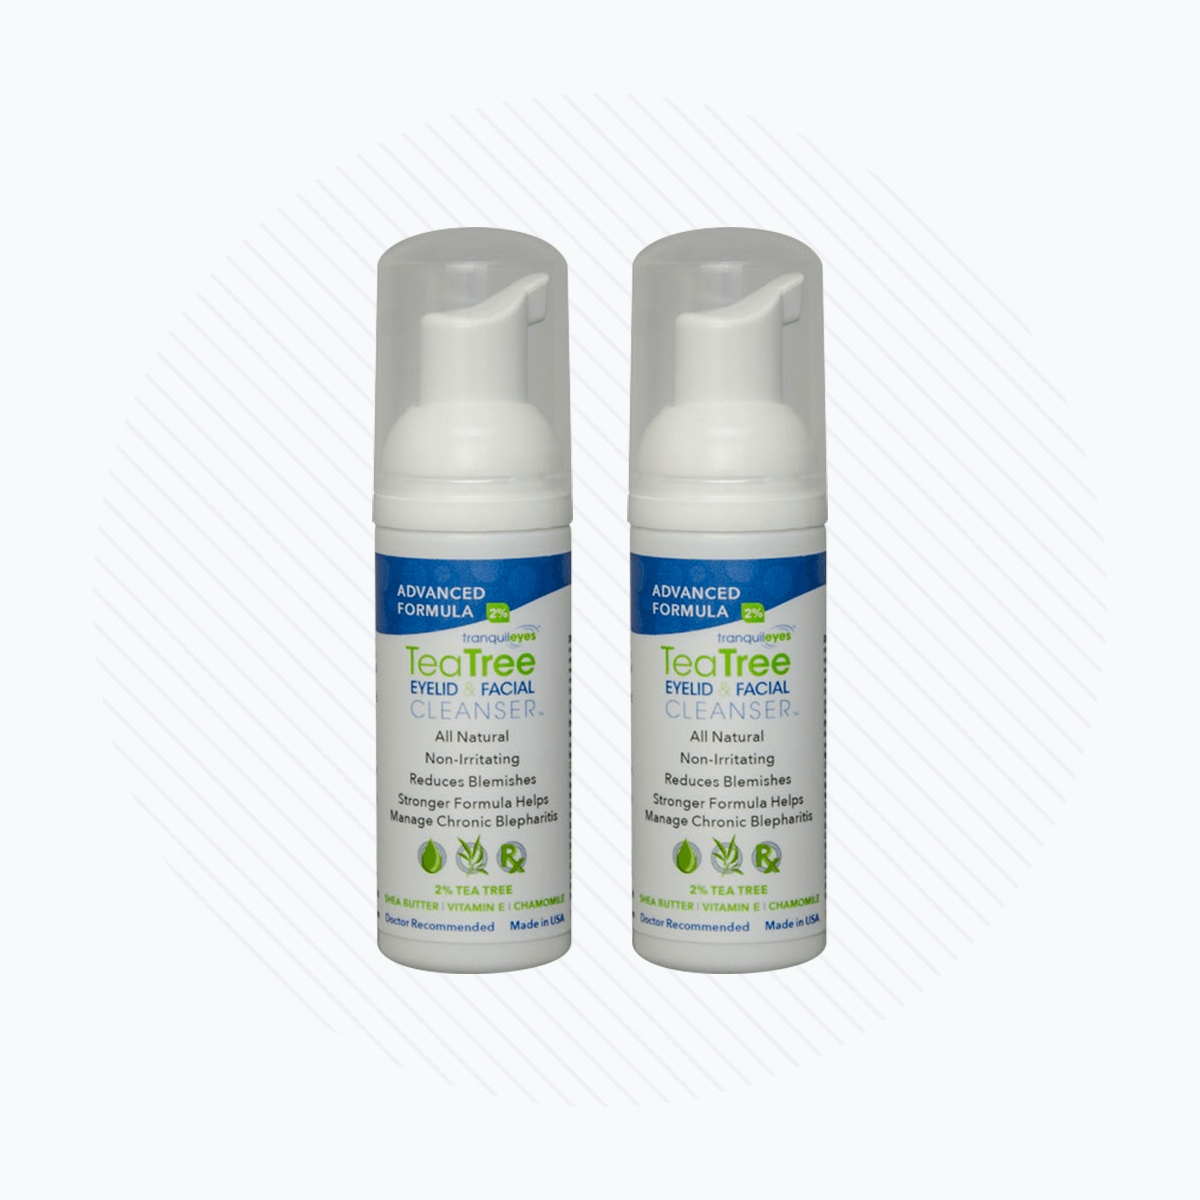 Tranquil Eyes - Advanced Formula 2% Tea Tree Eyelid and Facial Cleanser (2-Pack) 50mL Bottles - Dryeye Rescue